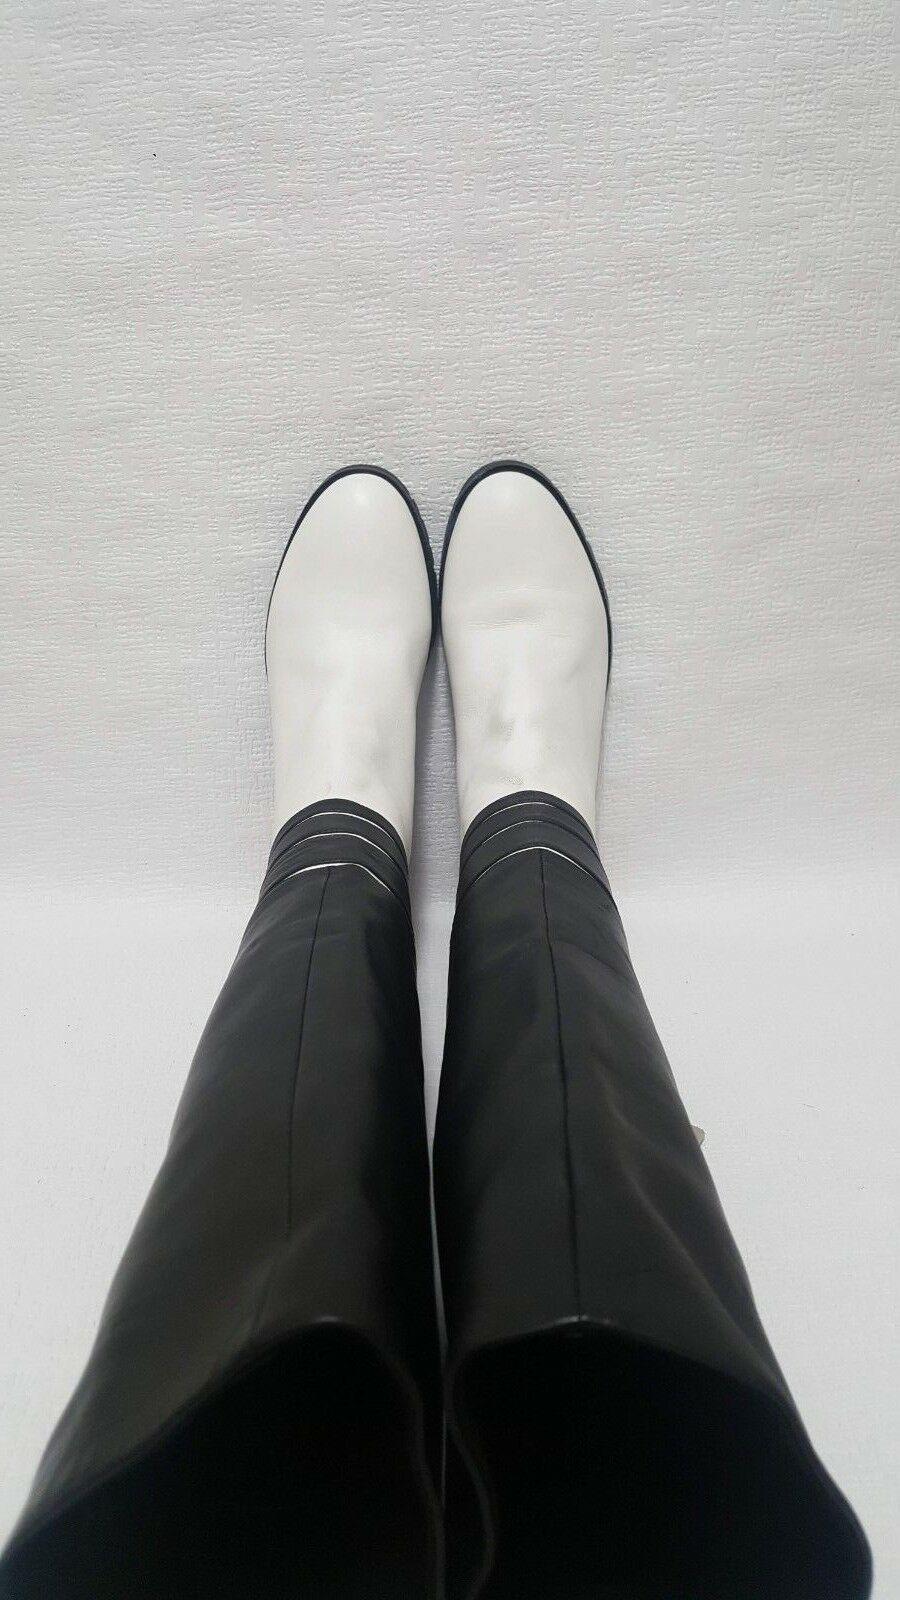 RARE UNIQUE KARL LAGERFELD Black White Lambskin Leather Beaded-Heel Boots SAMPLE Size 6 - SVNYFancy